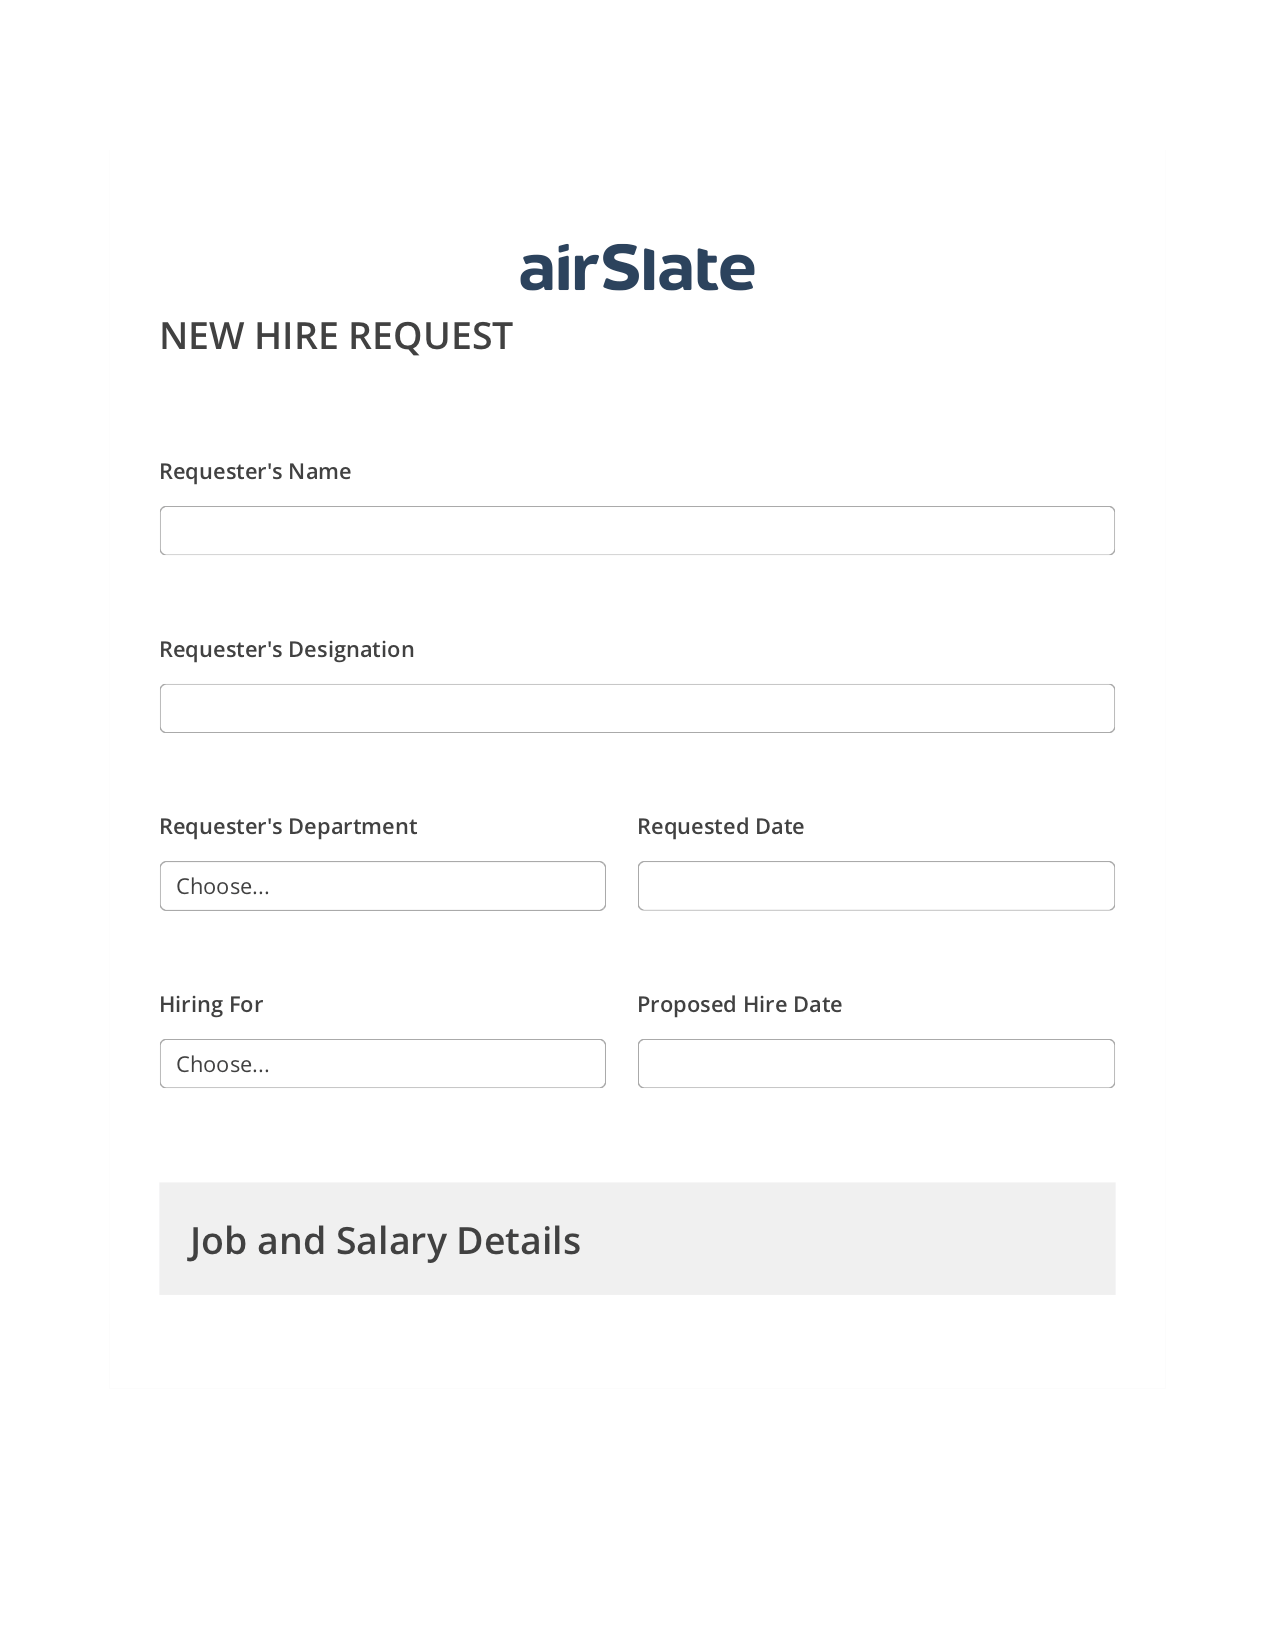 Hiring Request Workflow Pre-fill from MySQL Bot, Text Message Notification Bot, Archive to OneDrive Bot